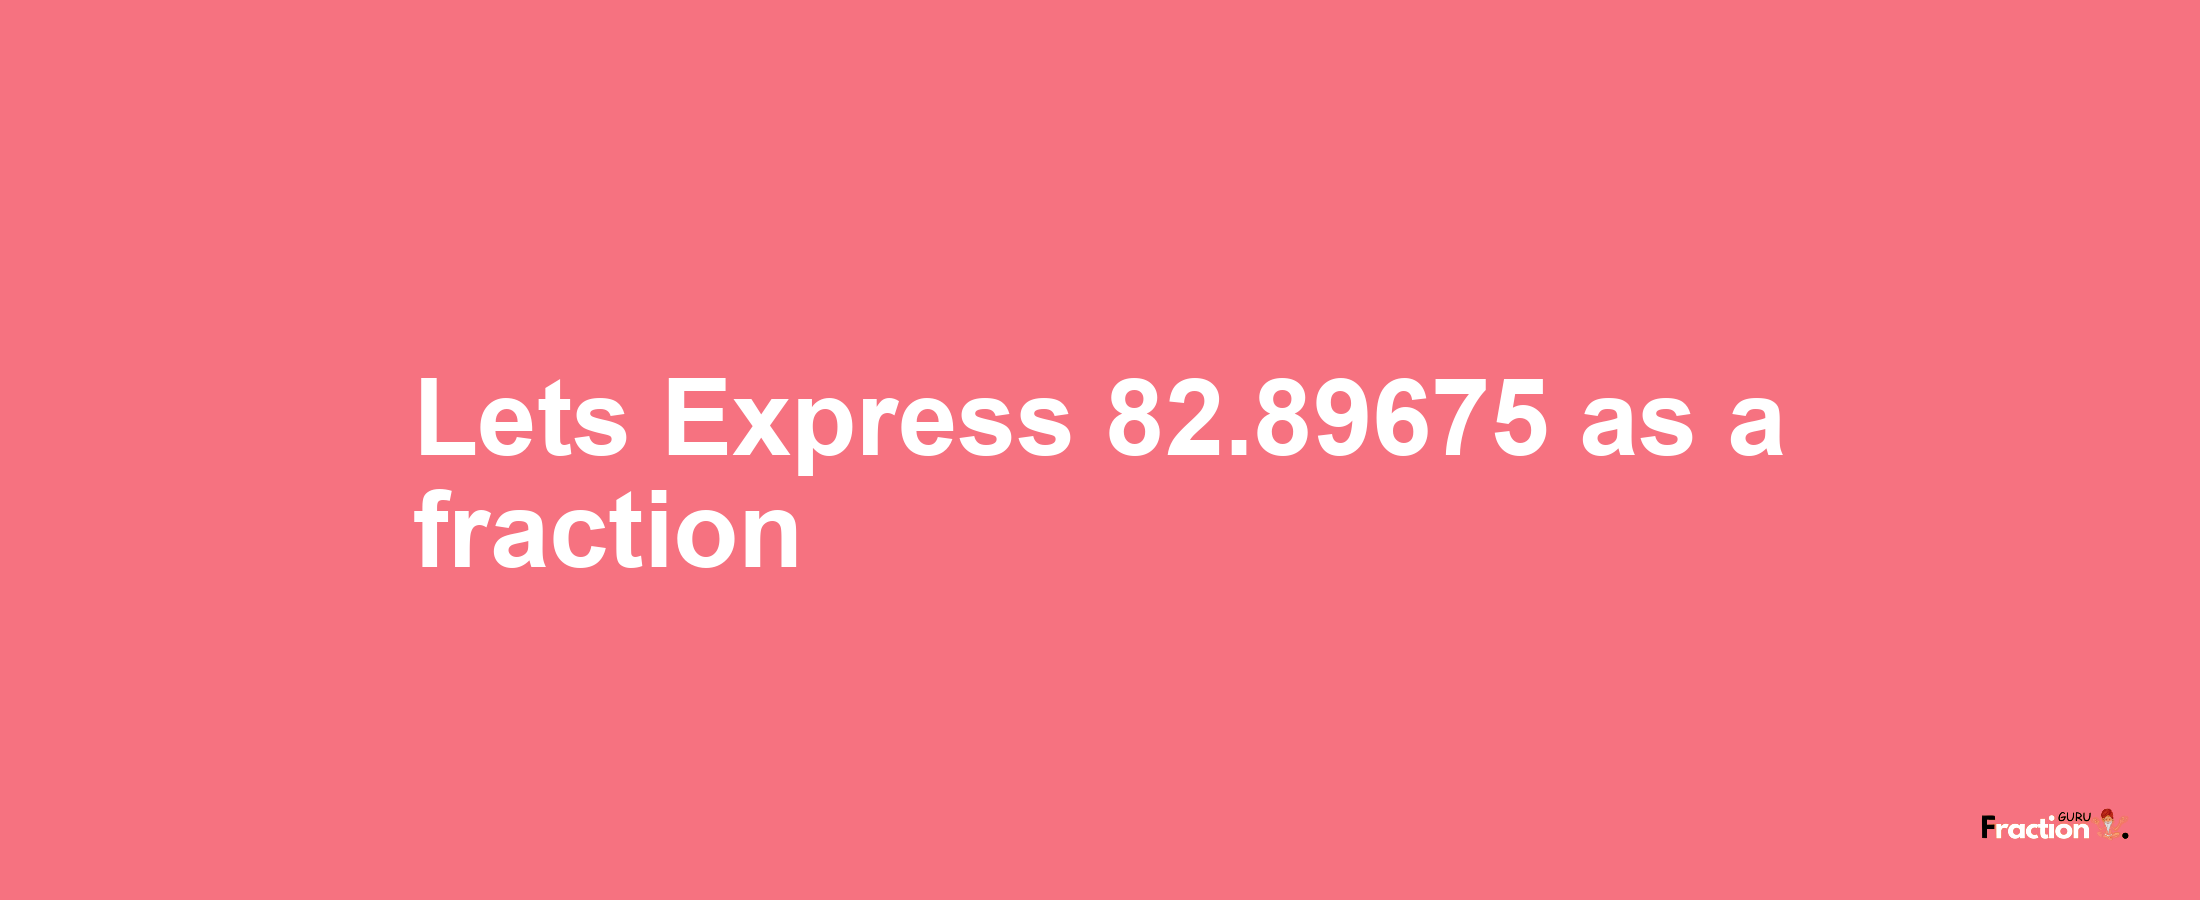 Lets Express 82.89675 as afraction